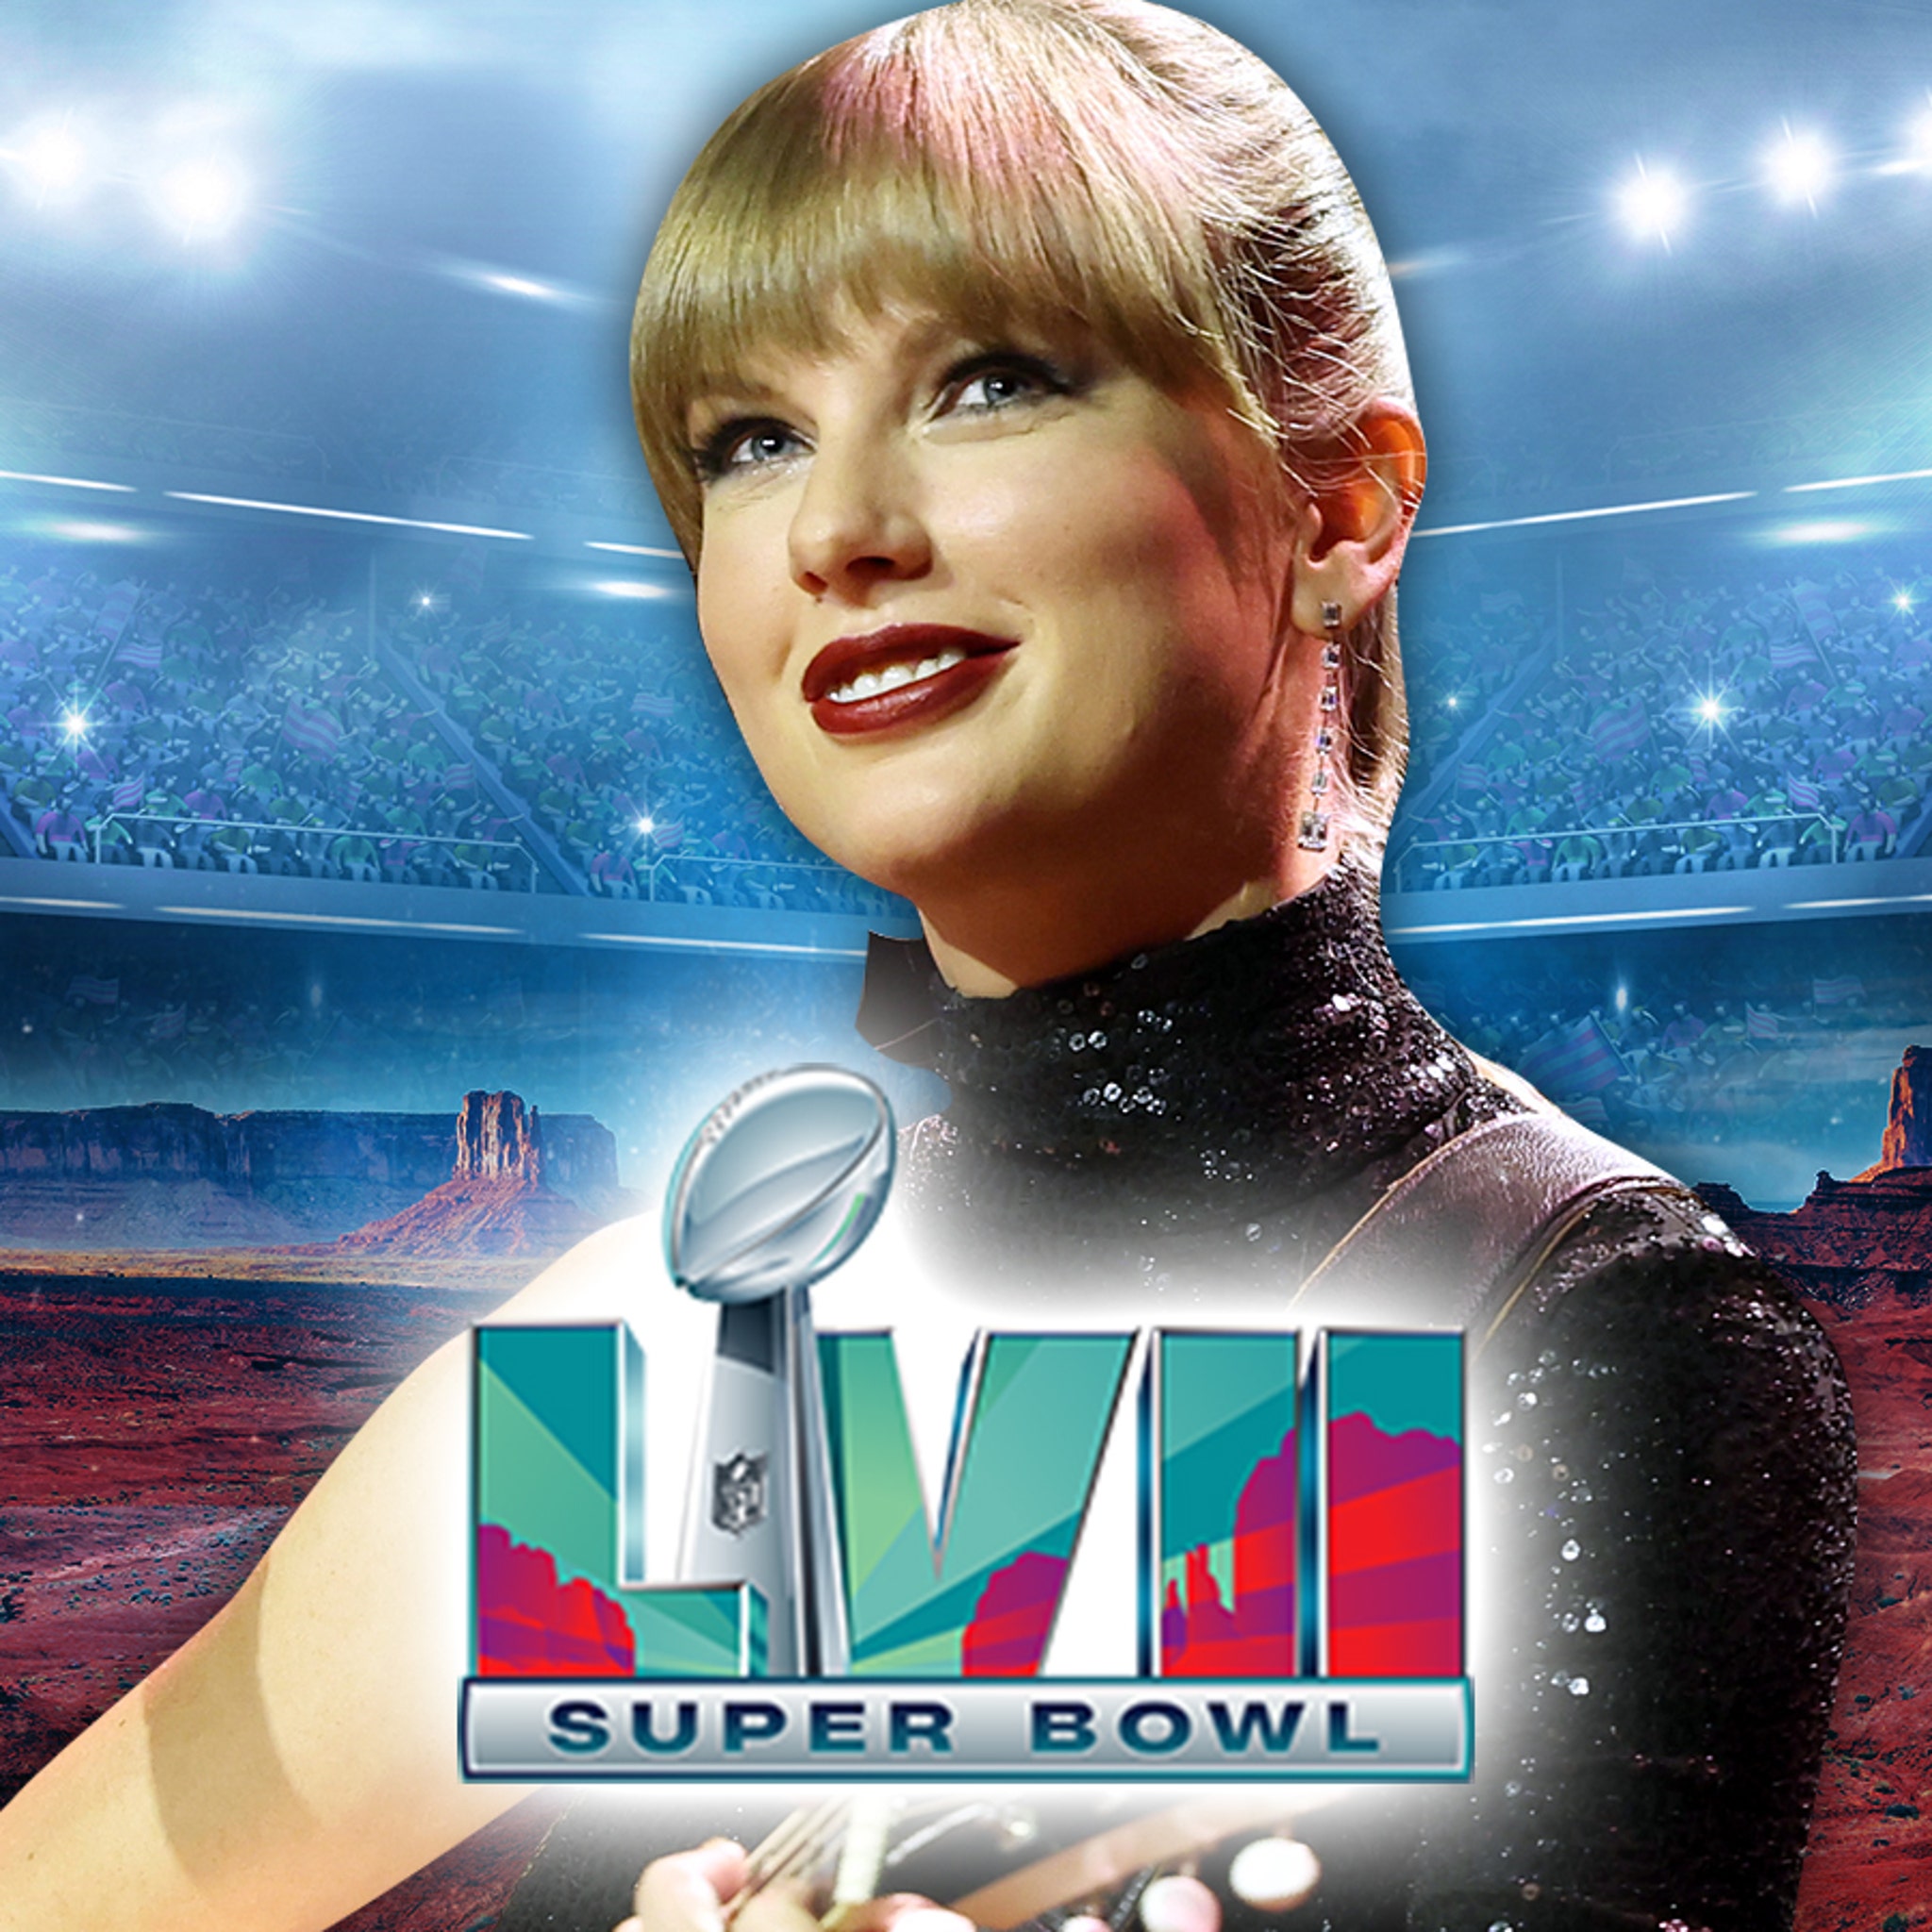 Super Bowl 2022 halftime performers announced